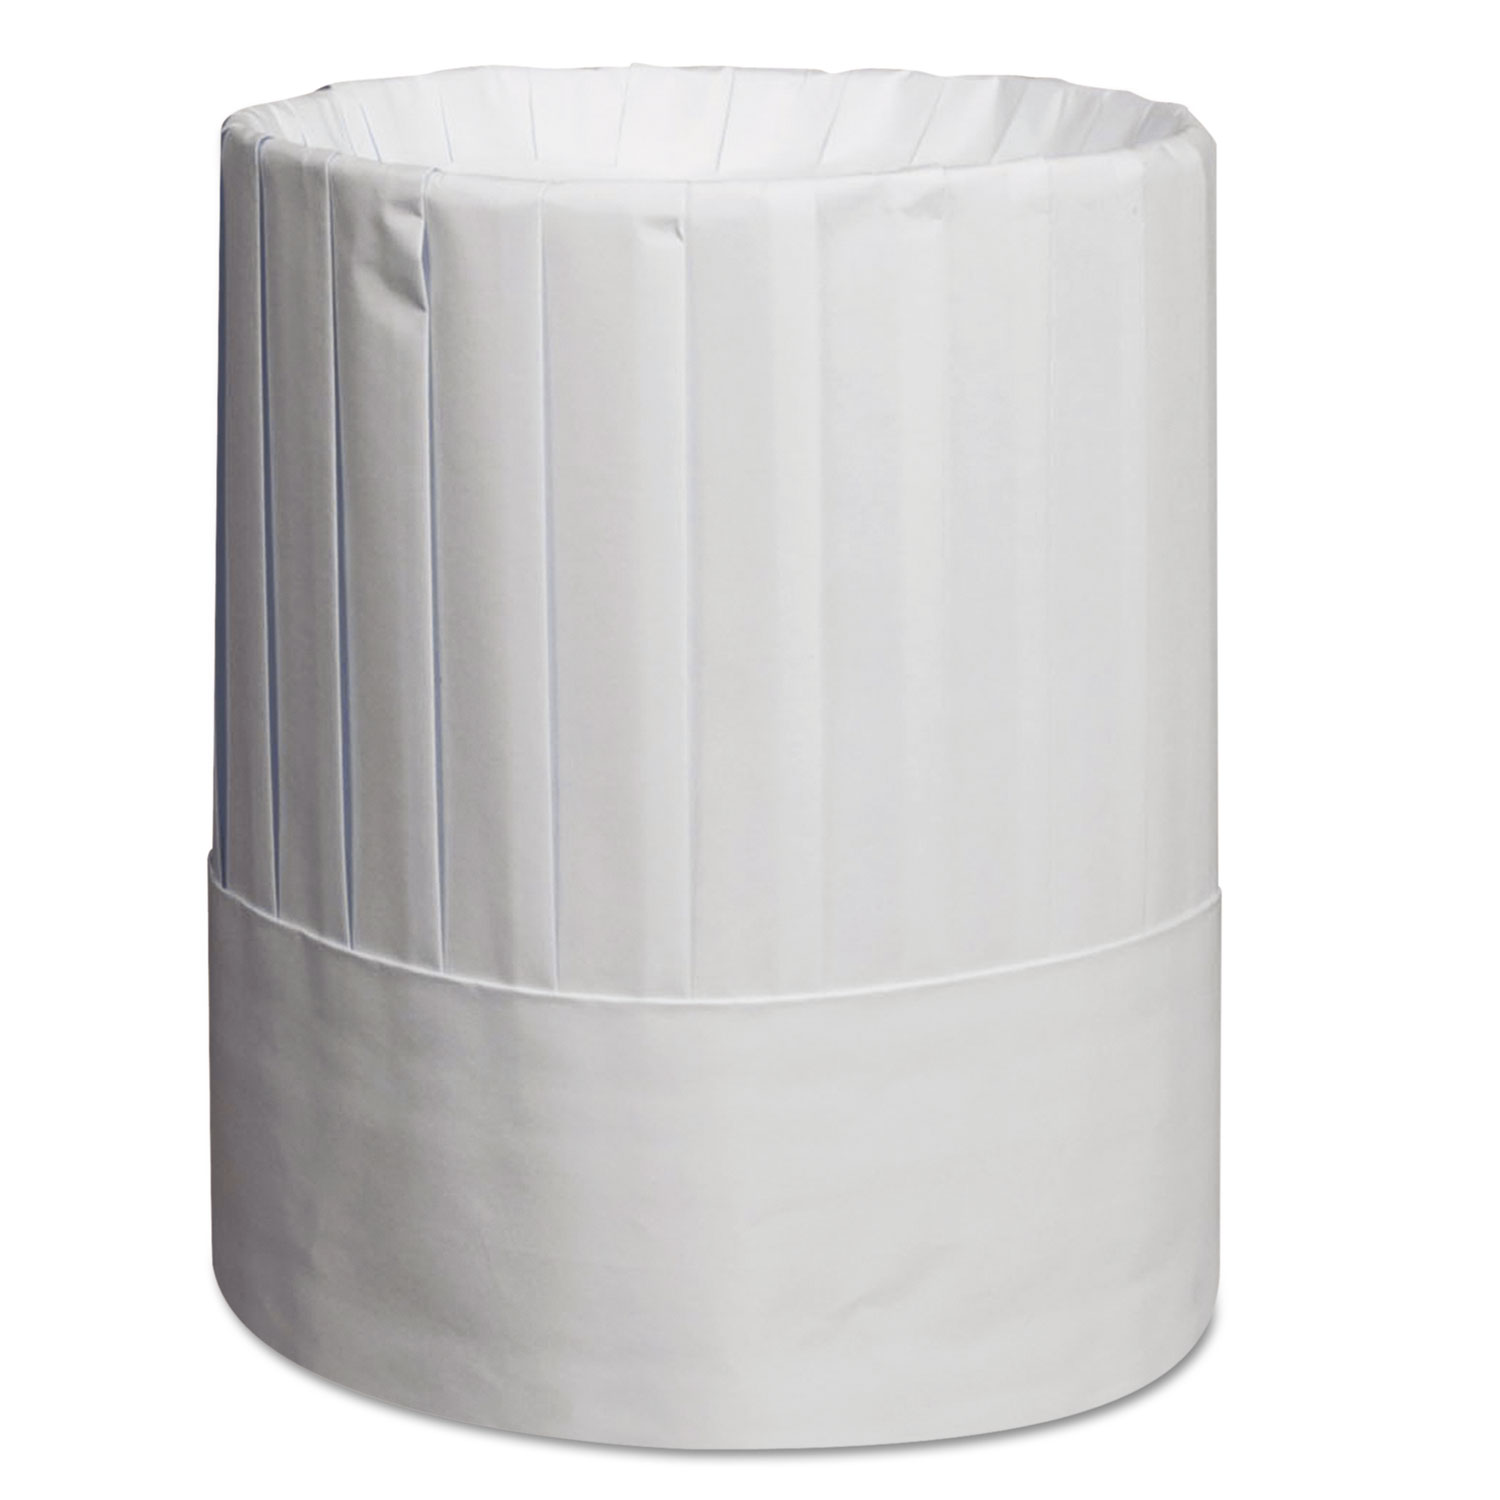 Pleated Chefs Hats, Paper, White, Adjustable, 9 in Tall, 24/Carton